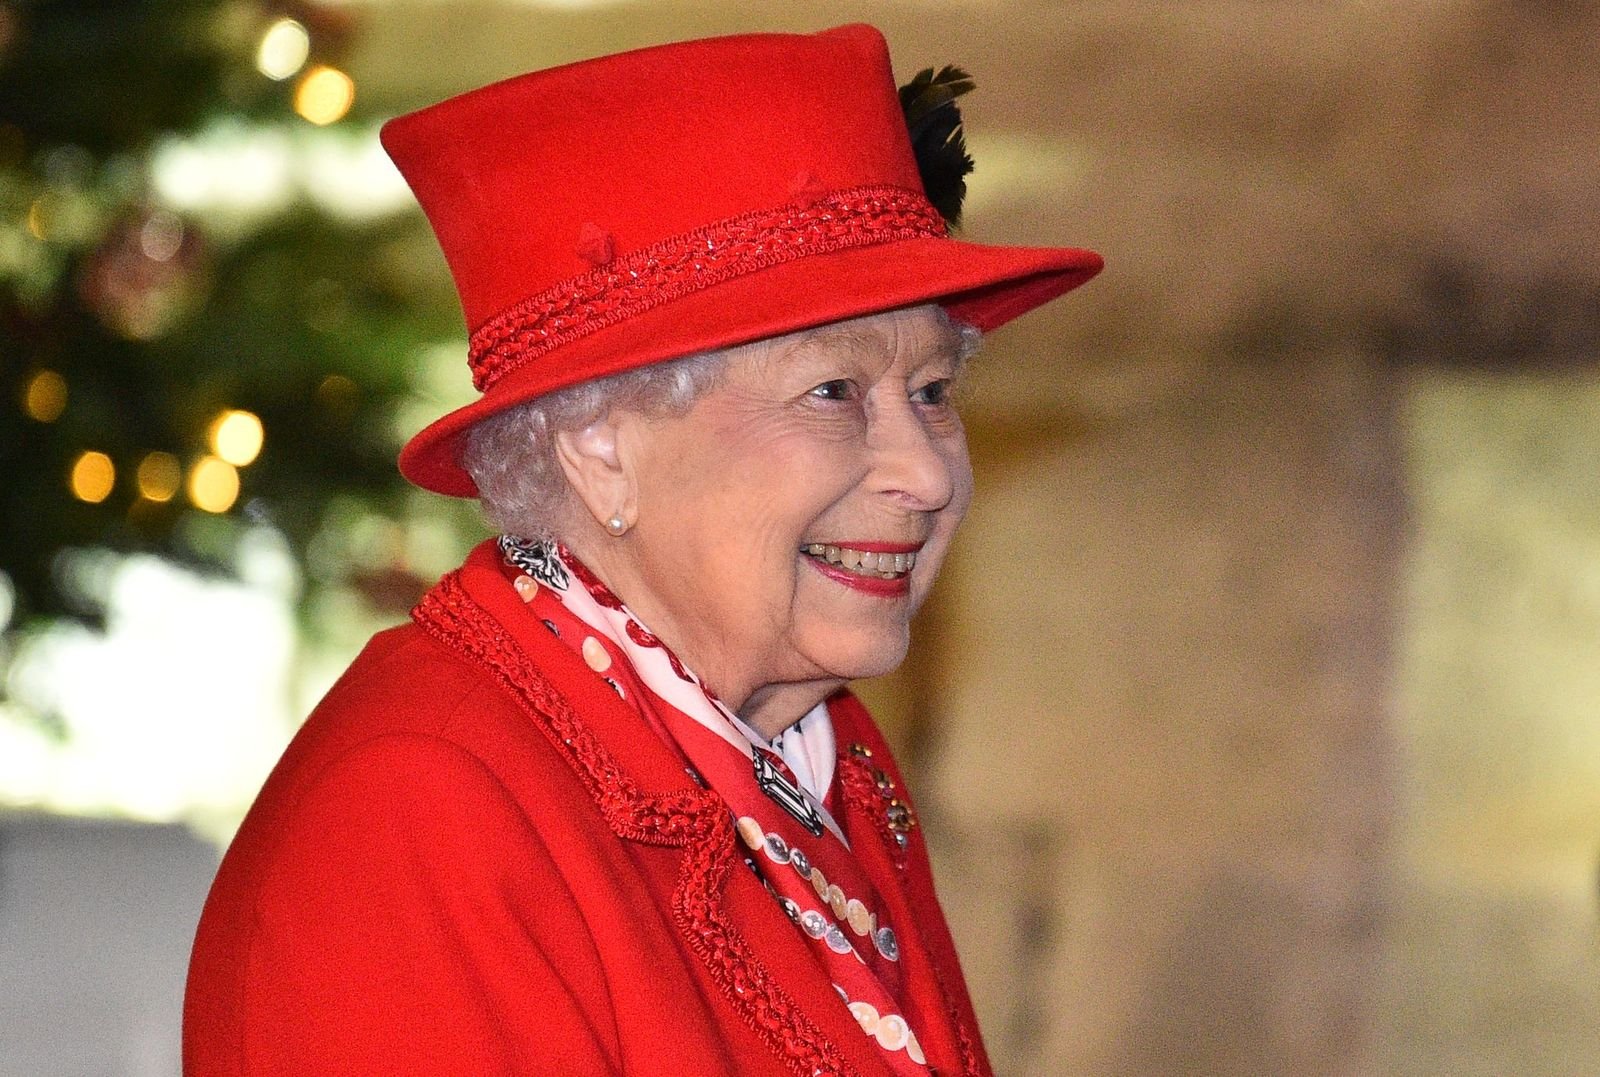 Queen Elizabeth II speaking to local volunteers and key workers about their work during the COVID-19 pandemic and over Christmas in the quadrangle of Windsor Castle on December 8, 2020 | Getty Images